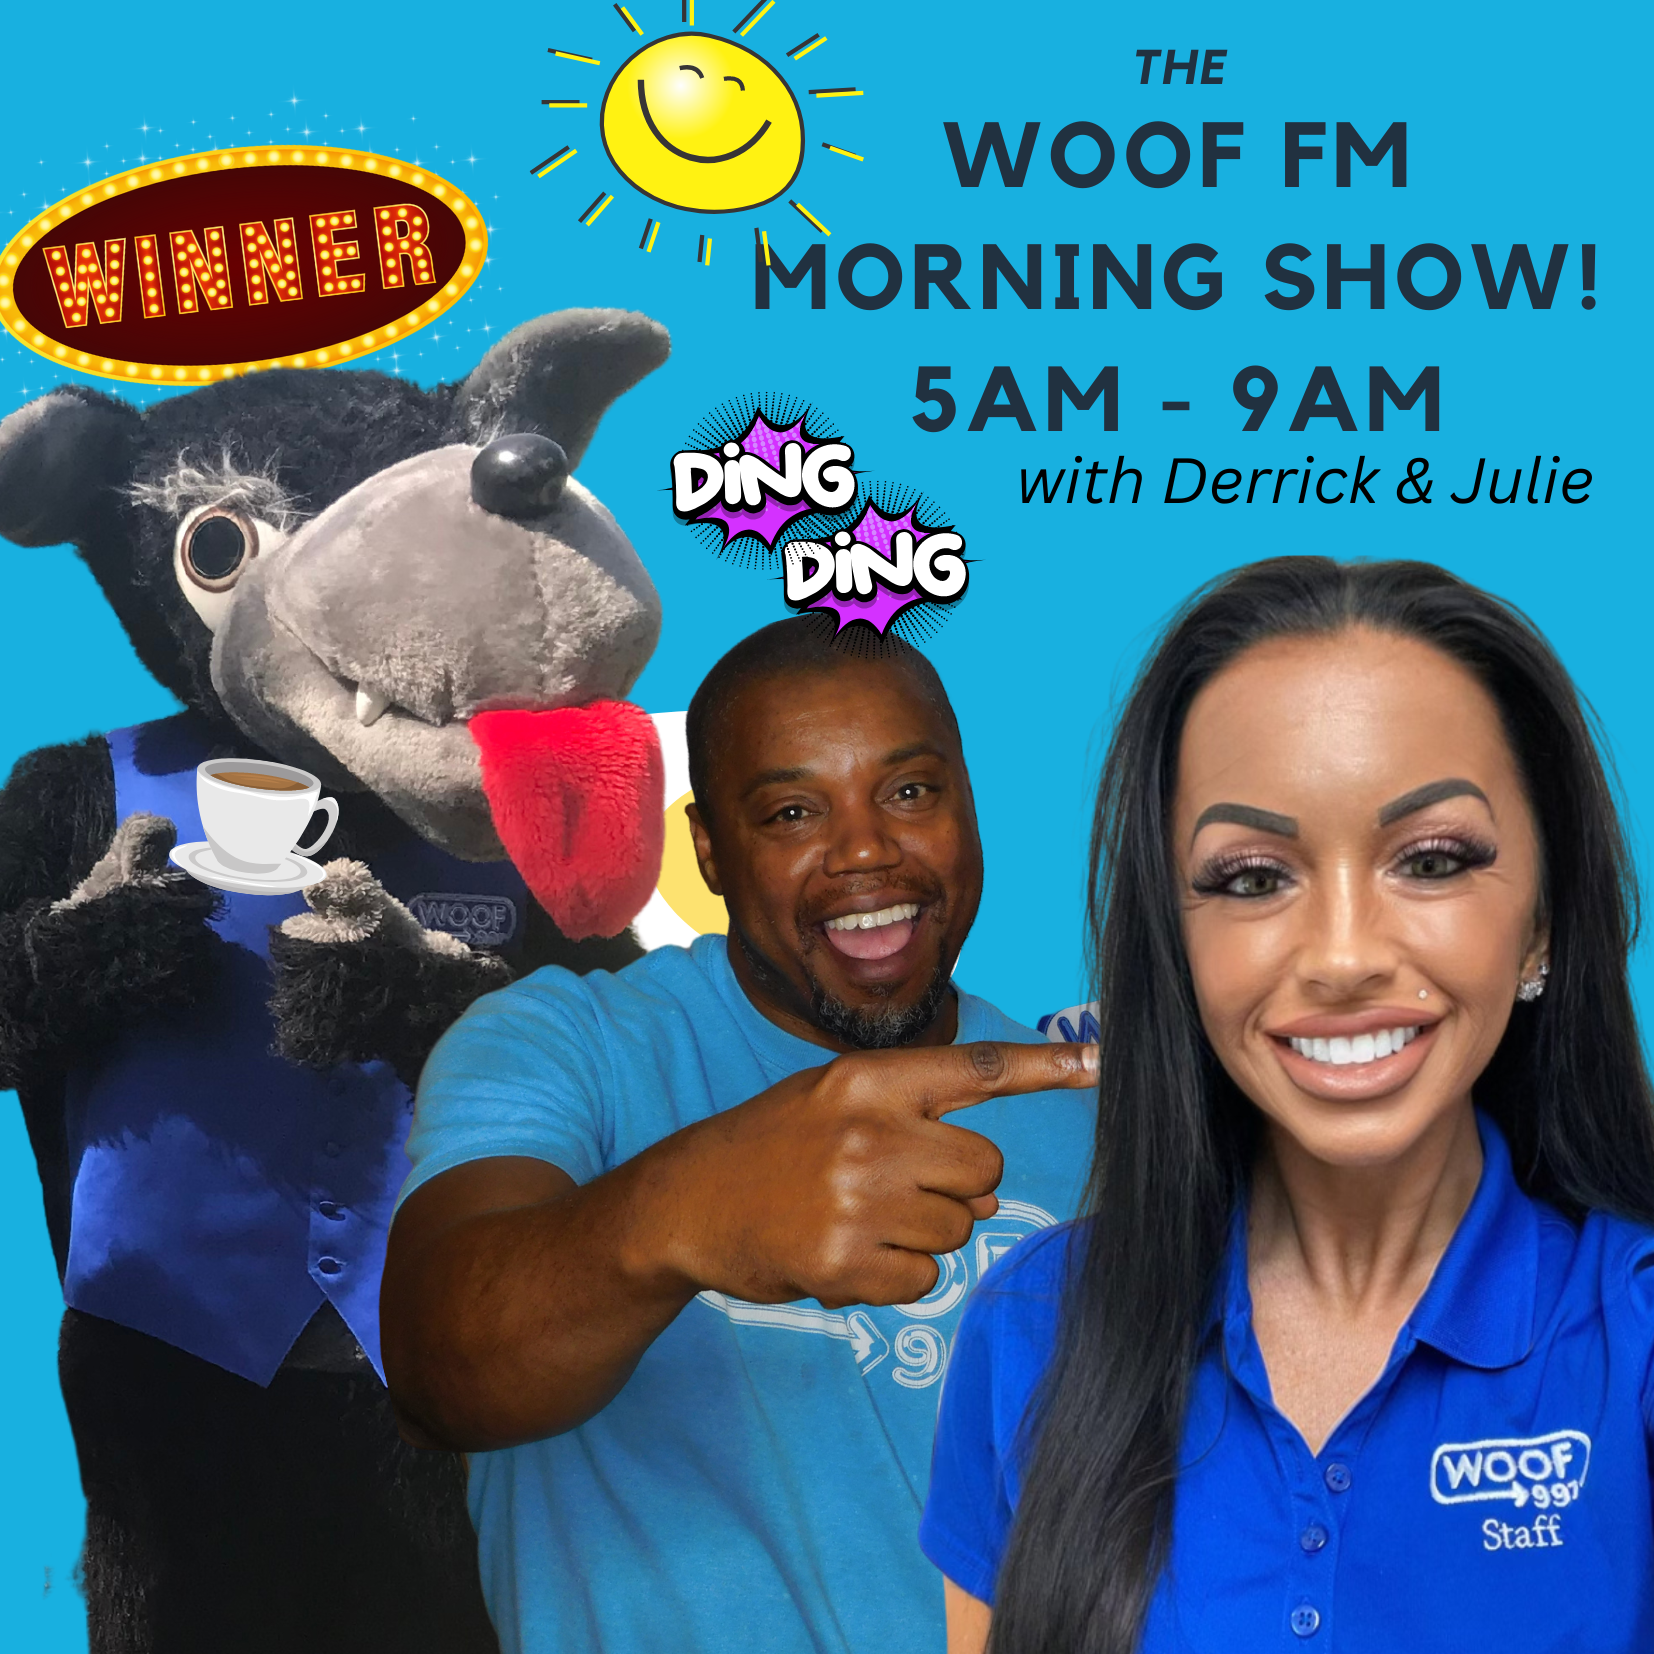 The WOOF FM Morning Show